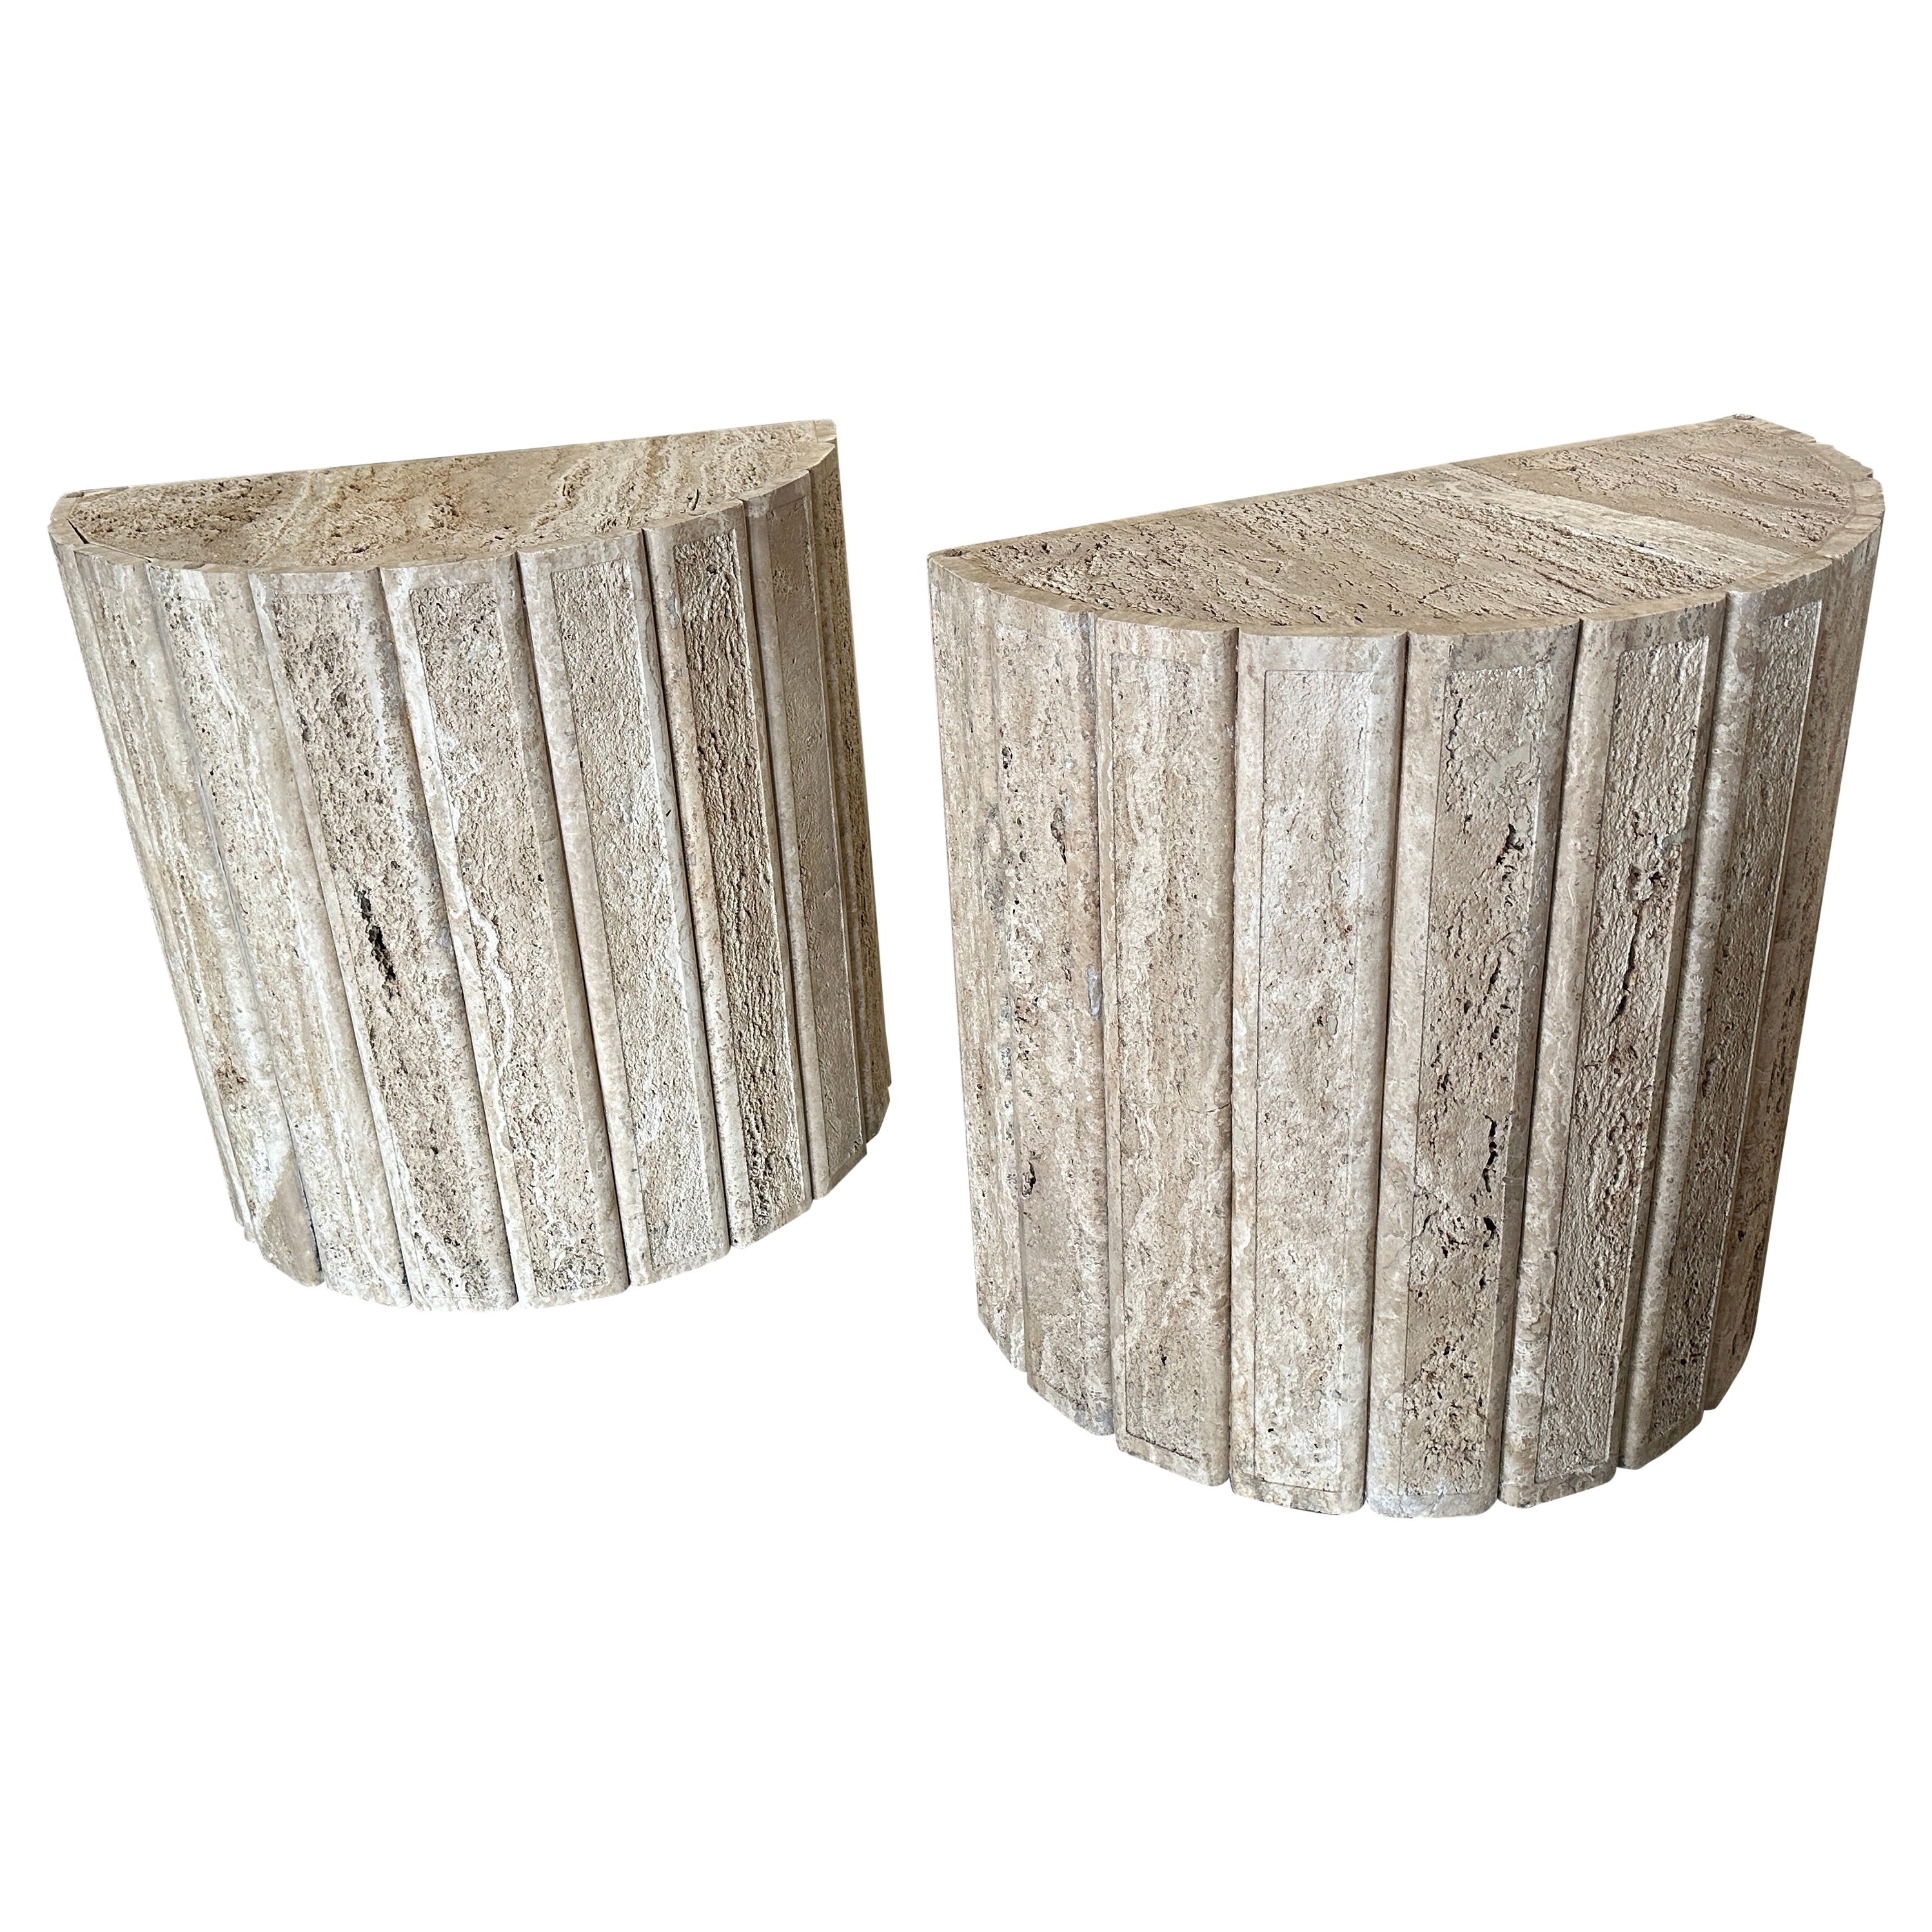 Fluted Travertine Side Tables or Bases